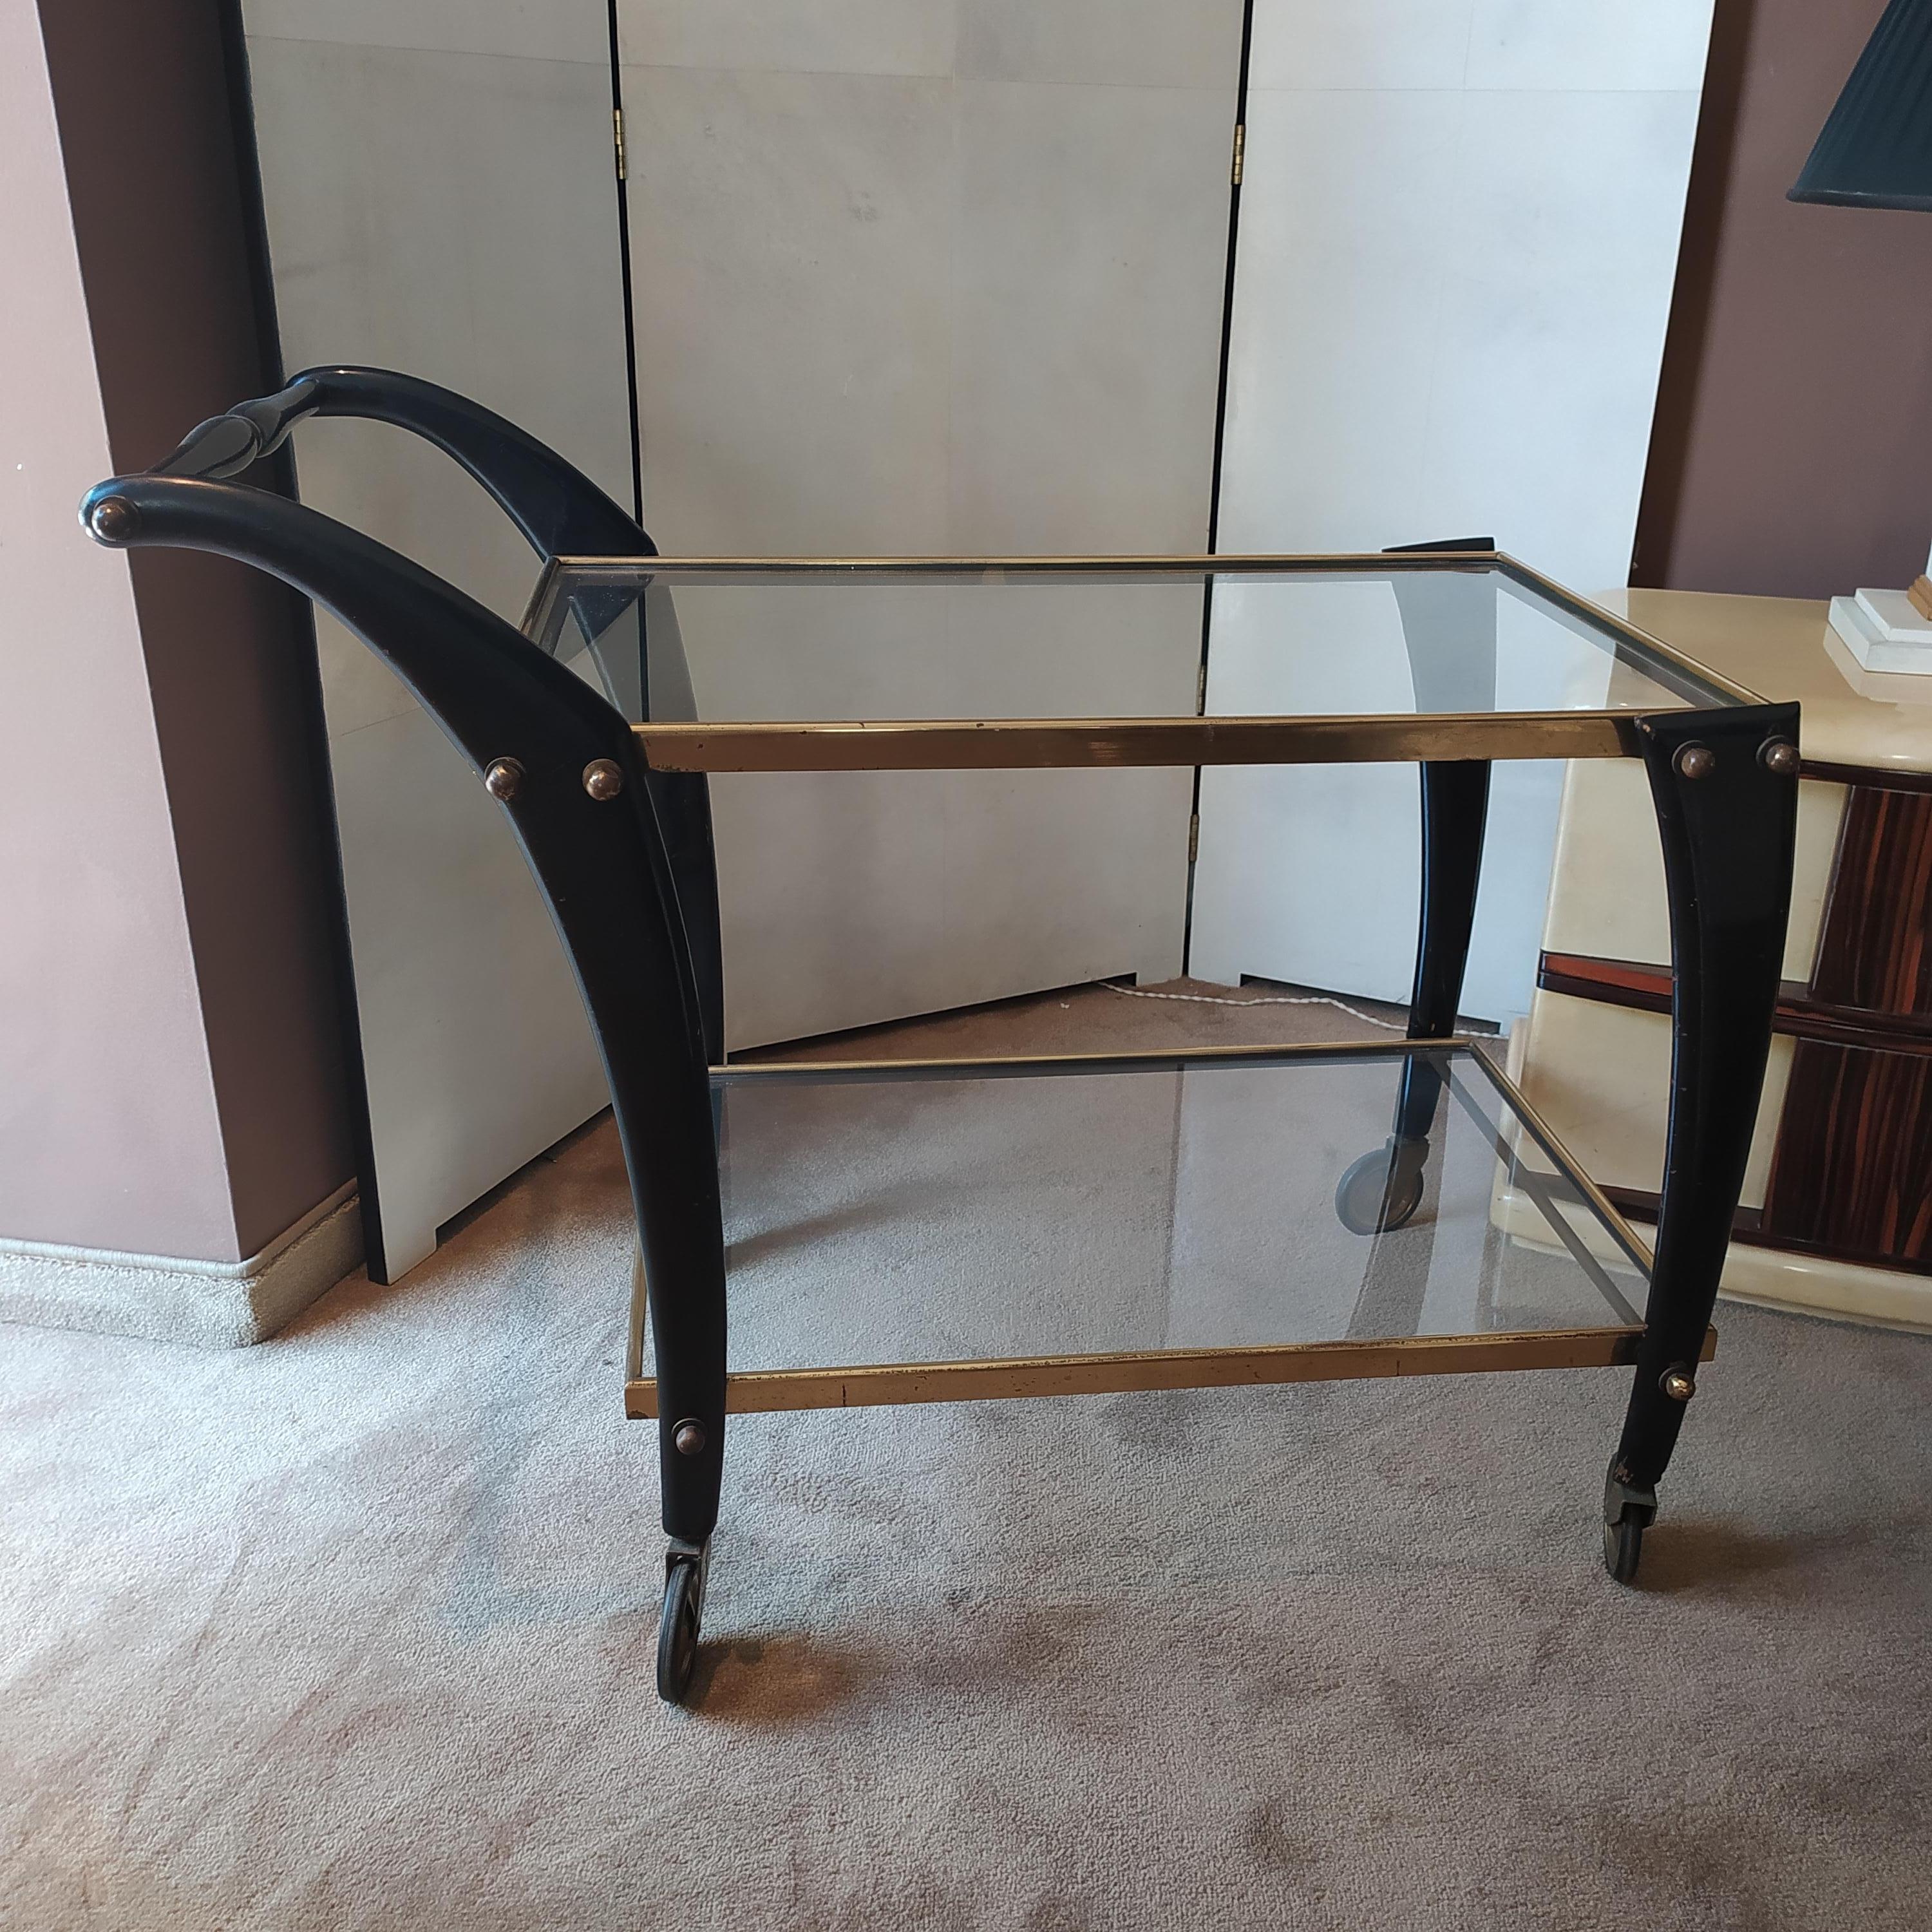 1950s Gorgeous Cesare Lacca bar cart.
The item is in excellent condition.